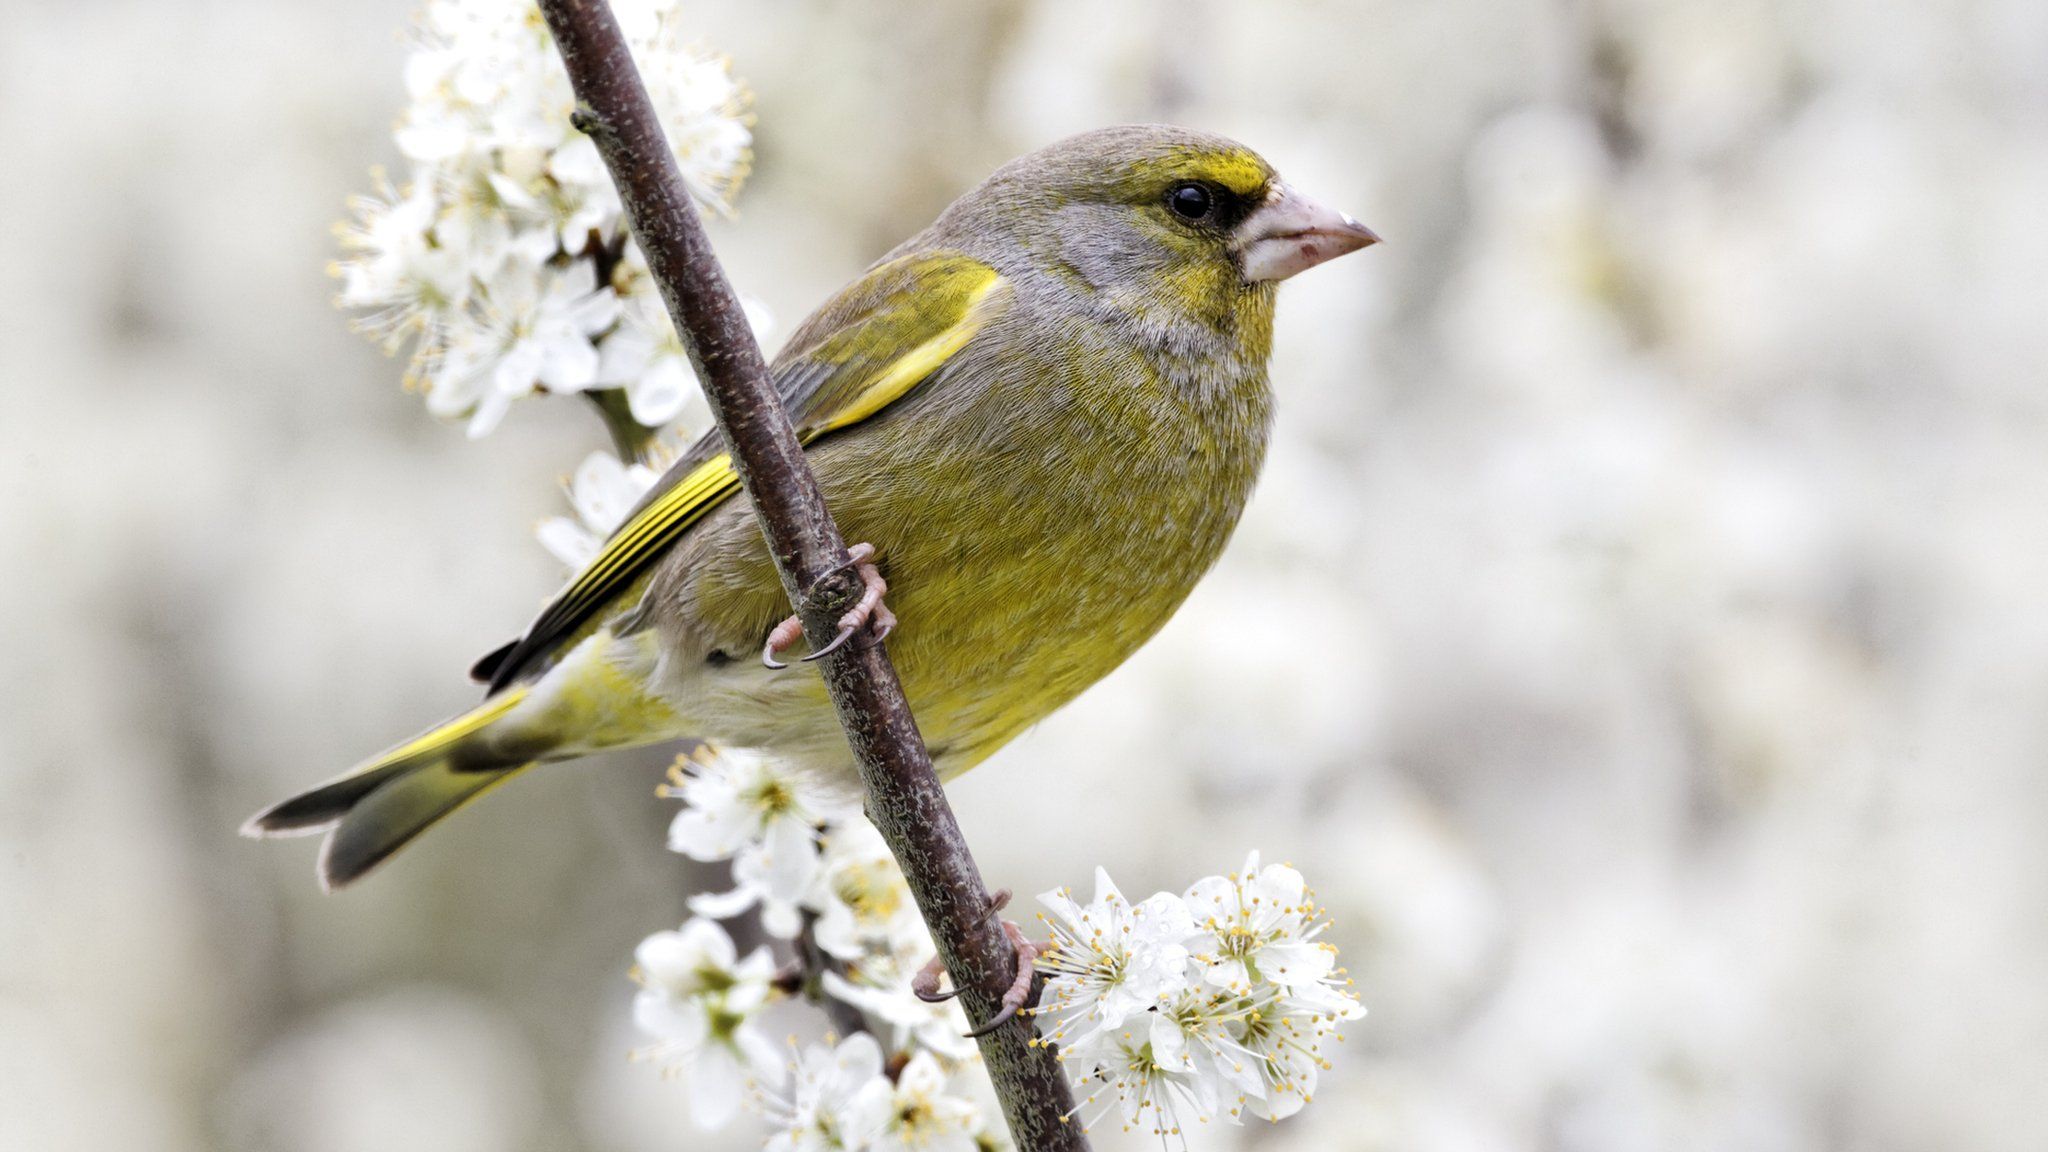 greenfinch on branch with blossoms